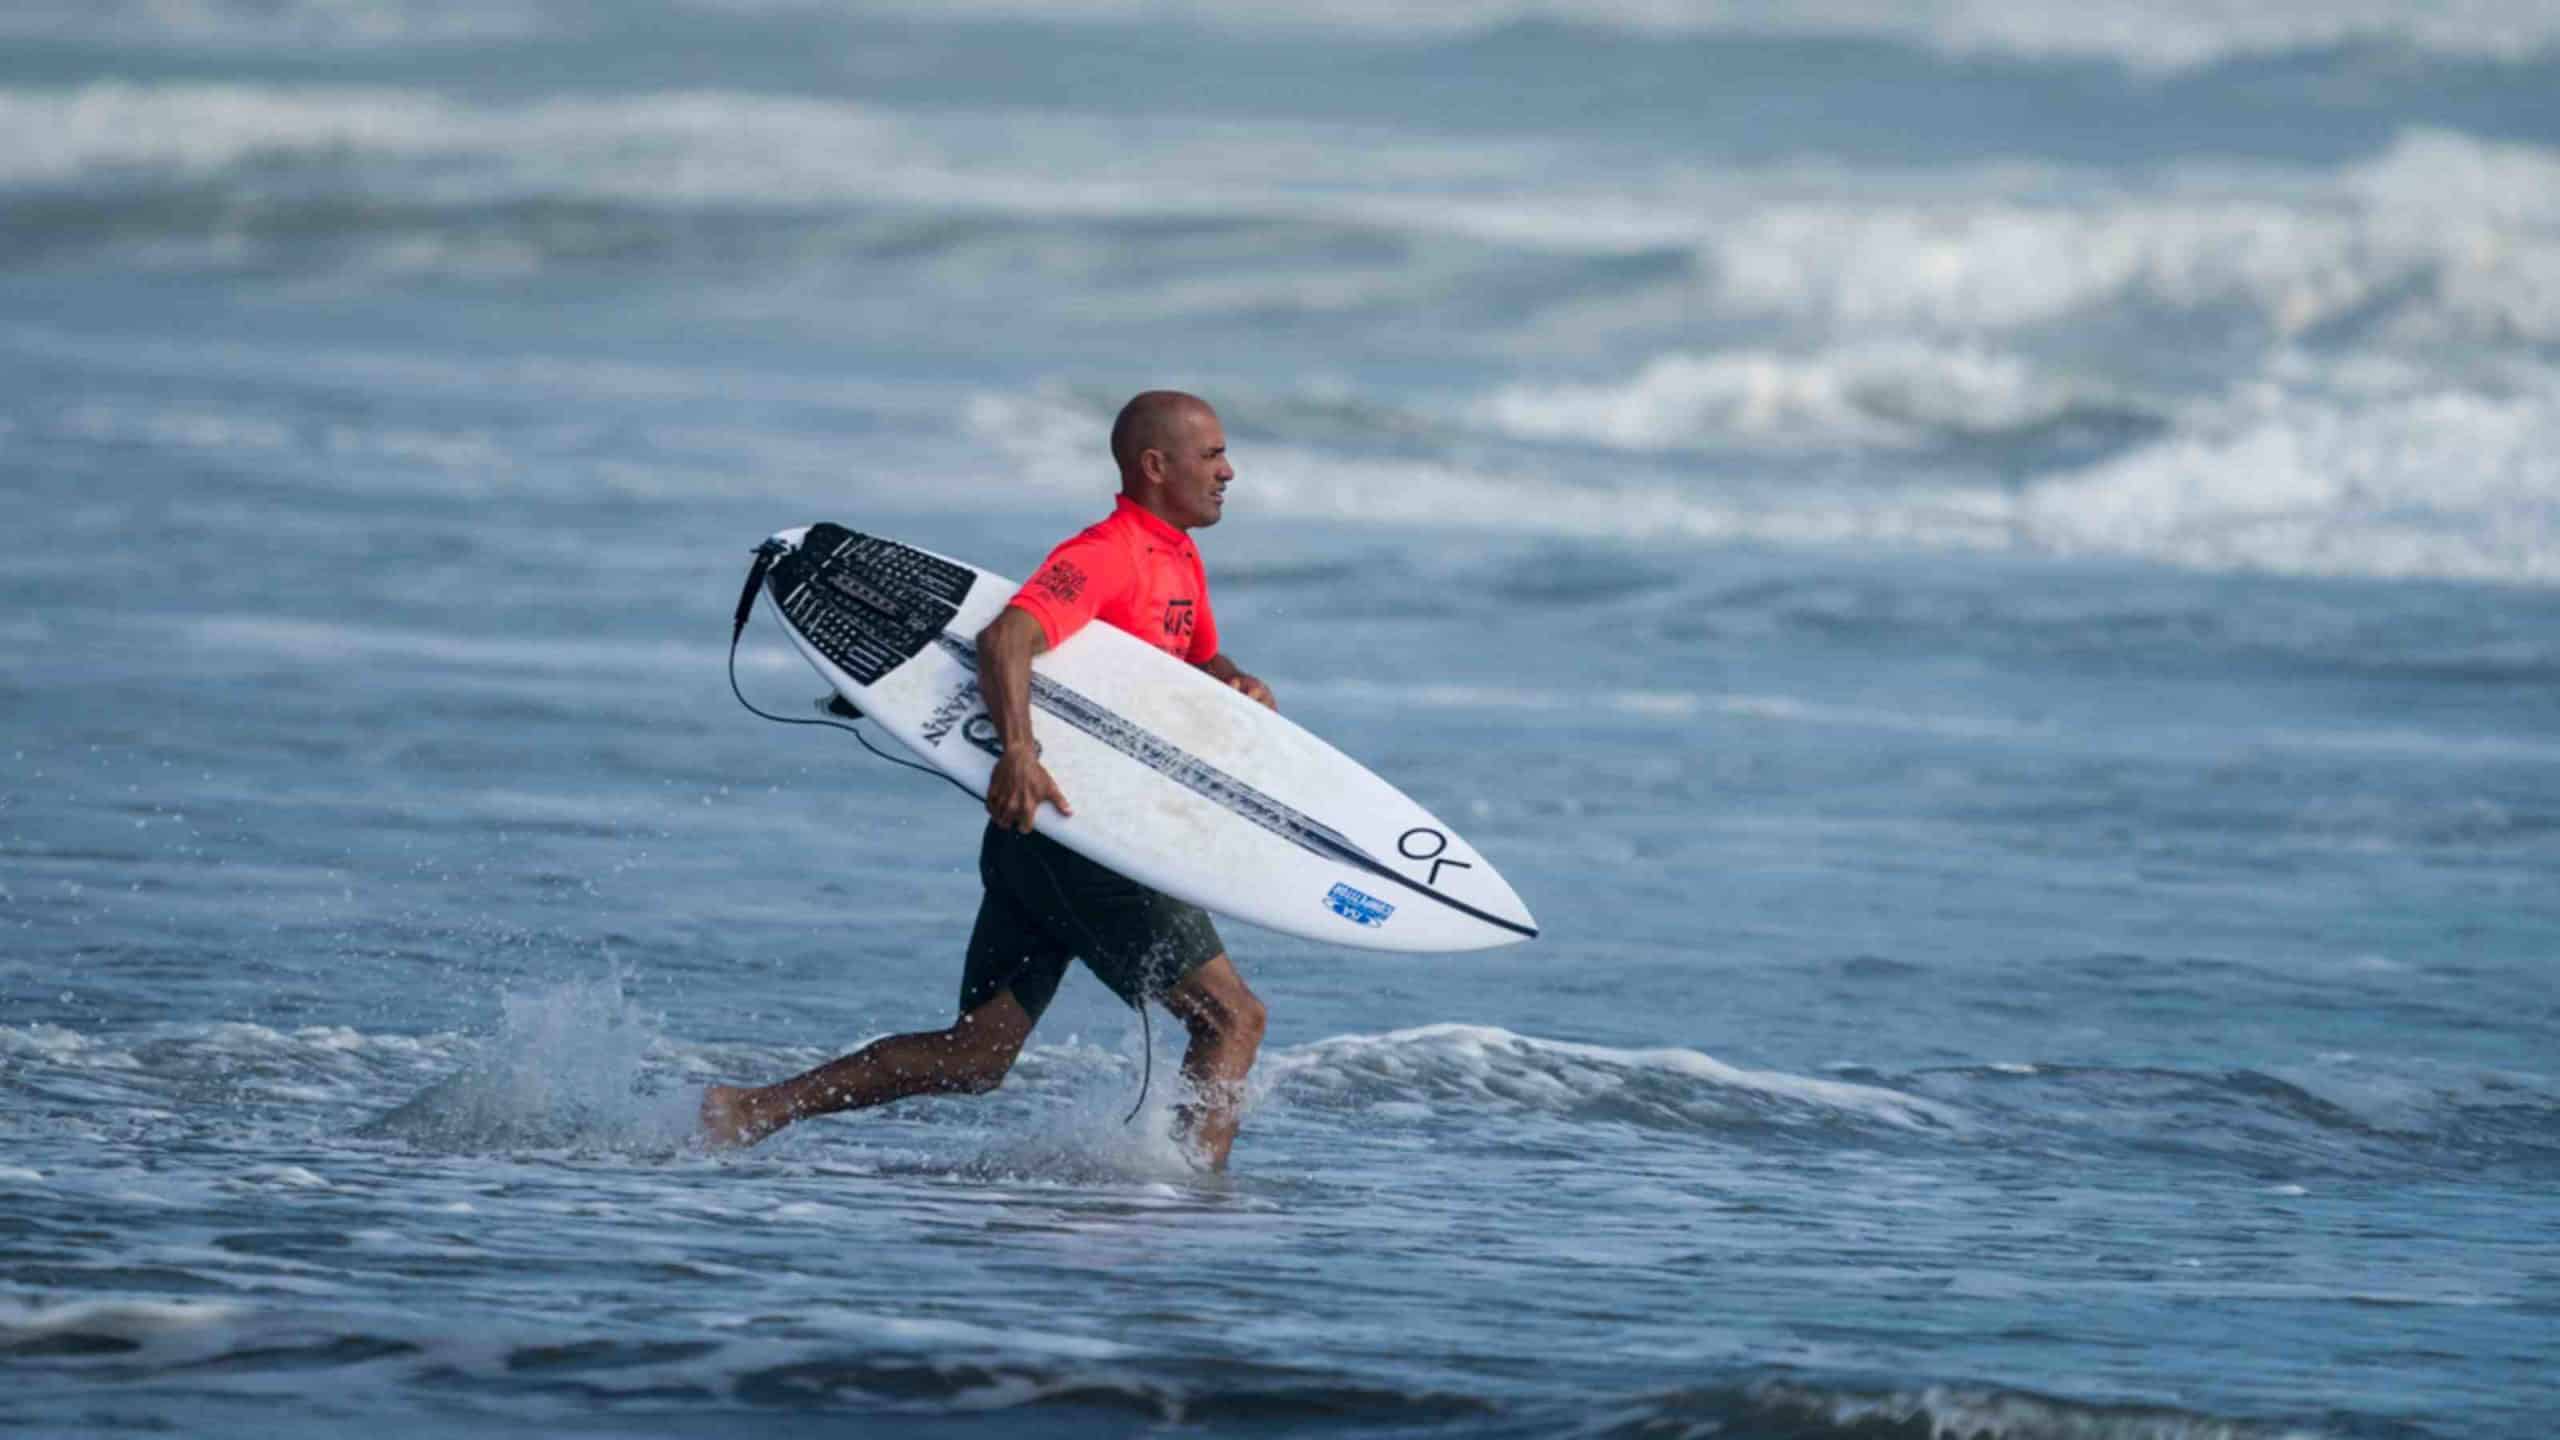 What years did Kelly Slater won world titles?